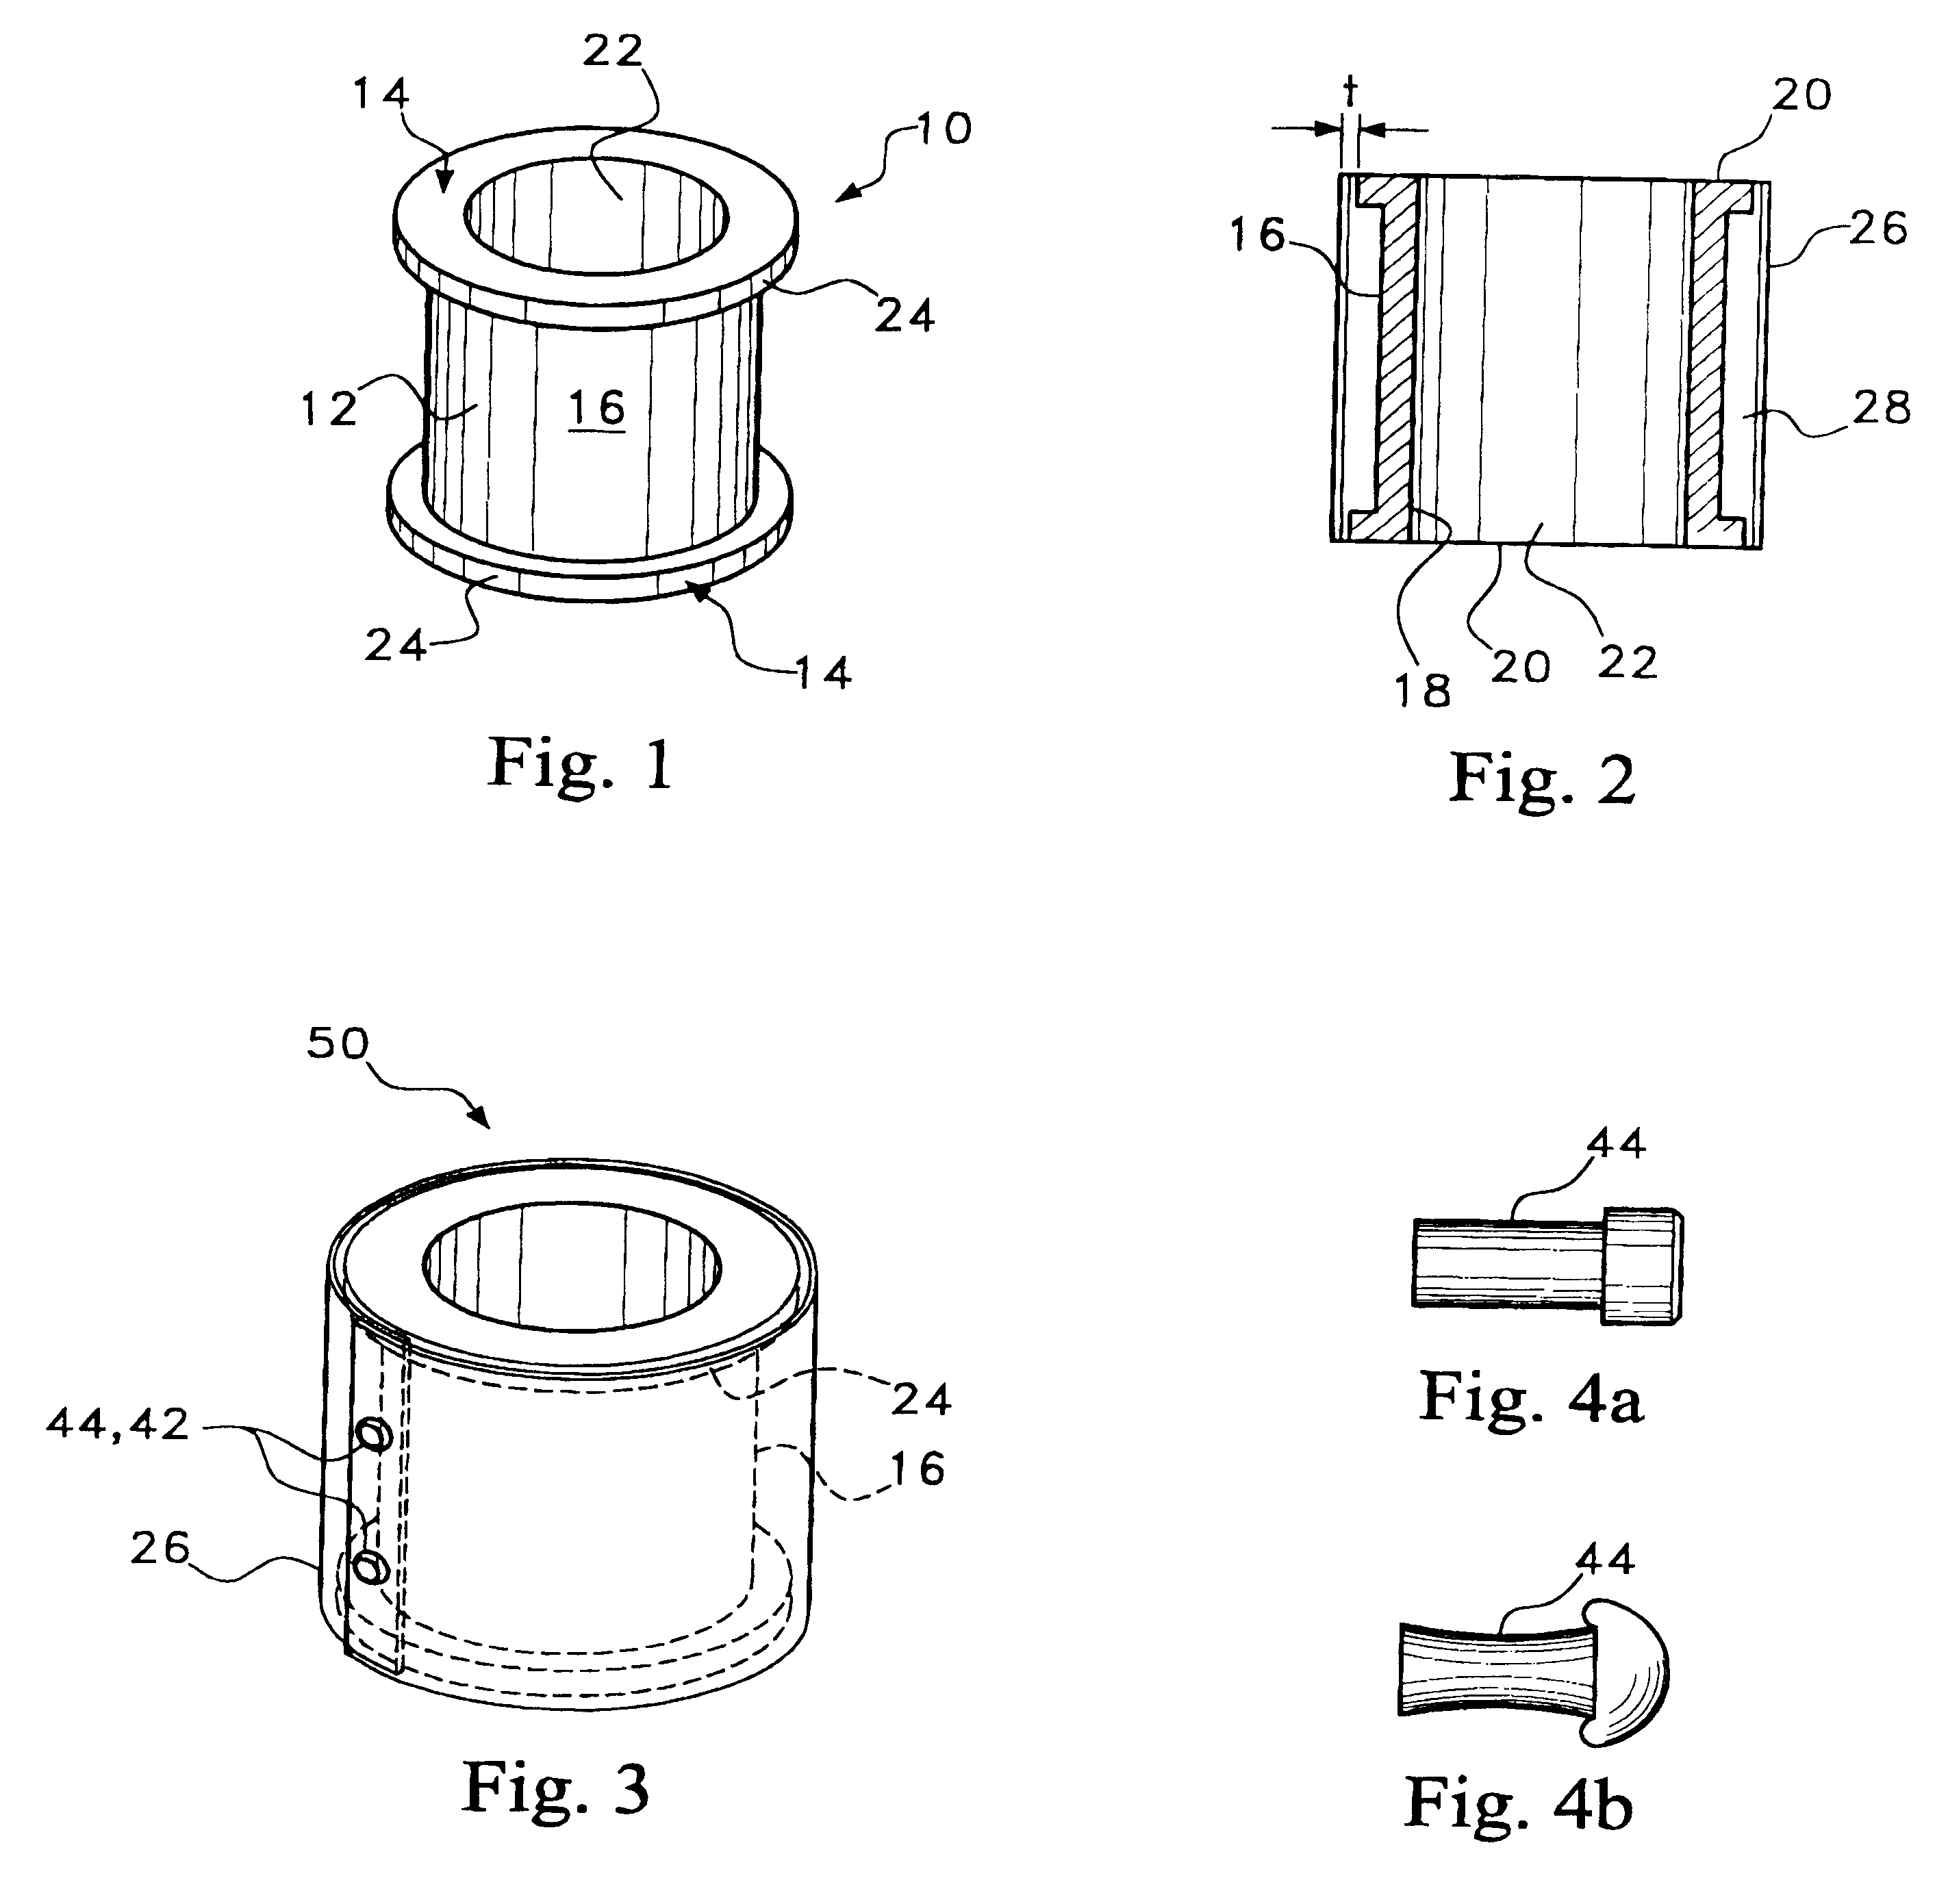 Omni-directional ultrasonic transducer apparatus and staking method